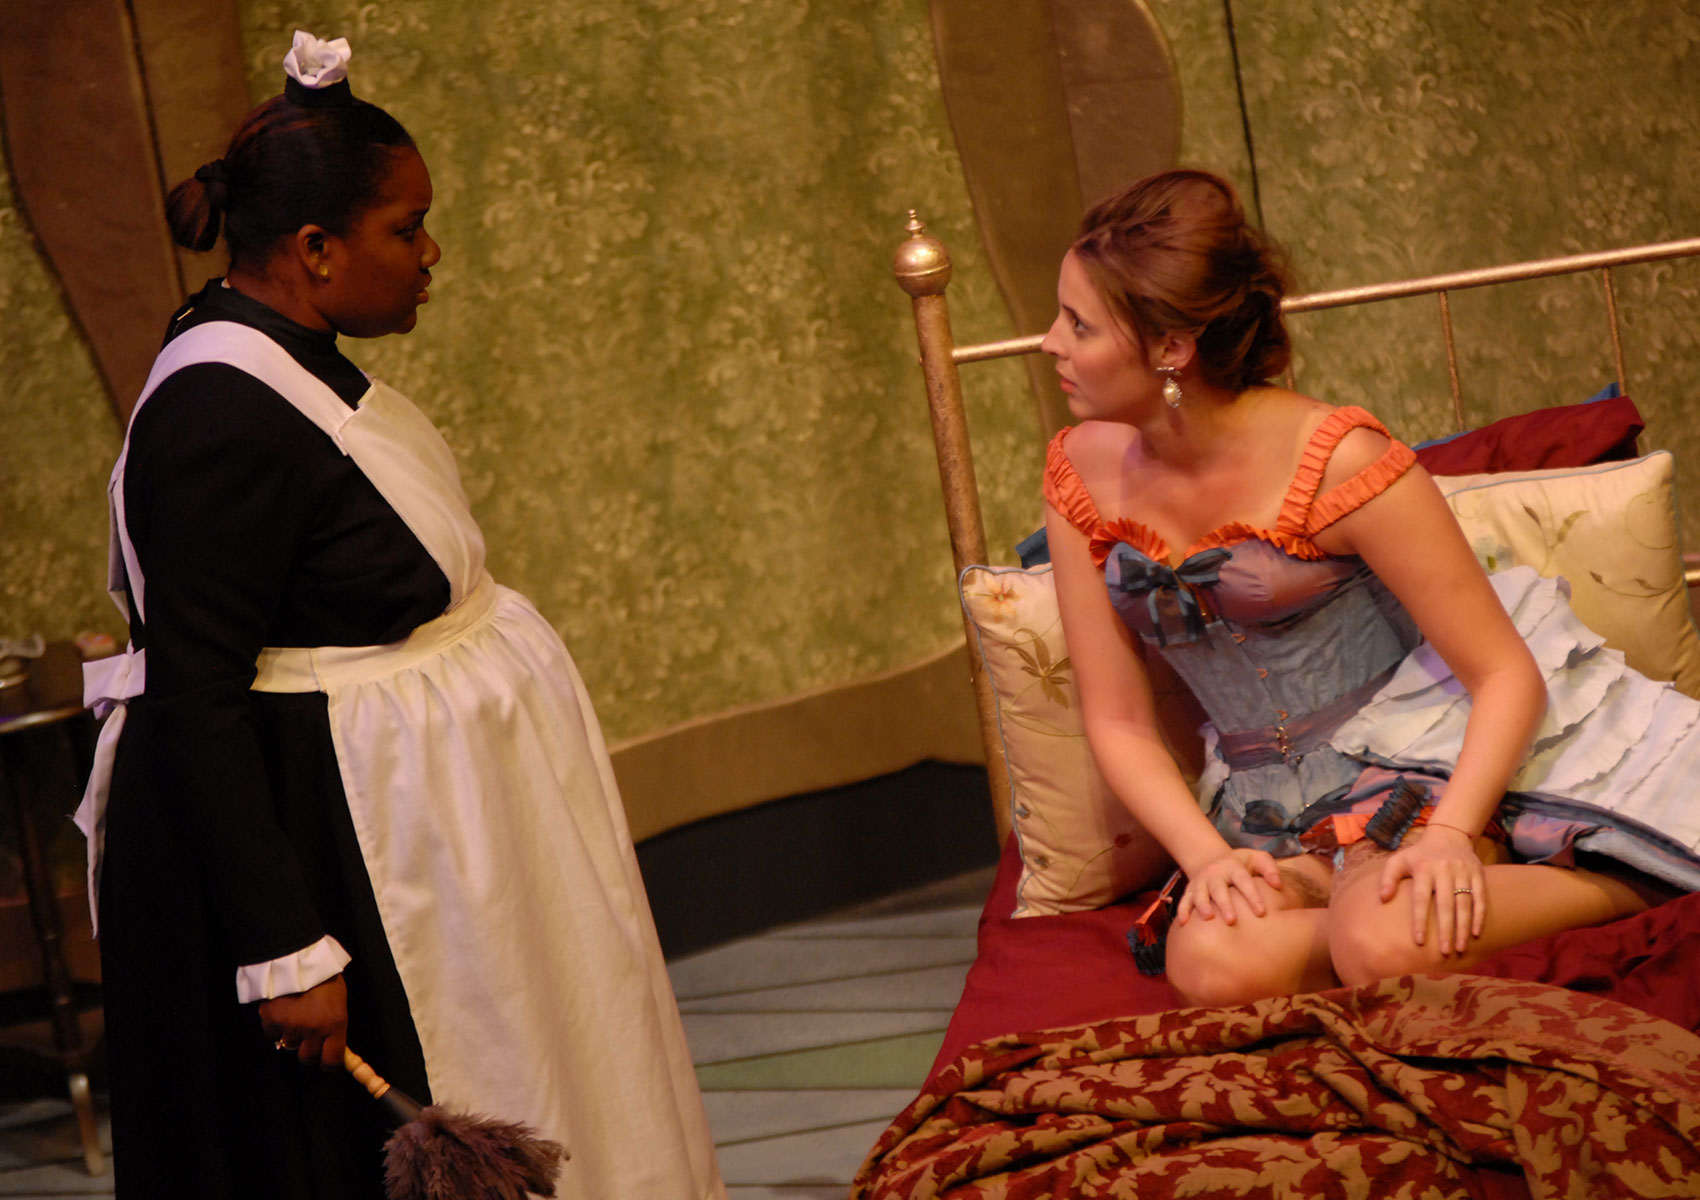 A woman dressed as a maid is standing and in conversation with a woman dressed in lingerie, who is sitting on her knees in a bed that is unmade; this woman is dressed in lingerie.